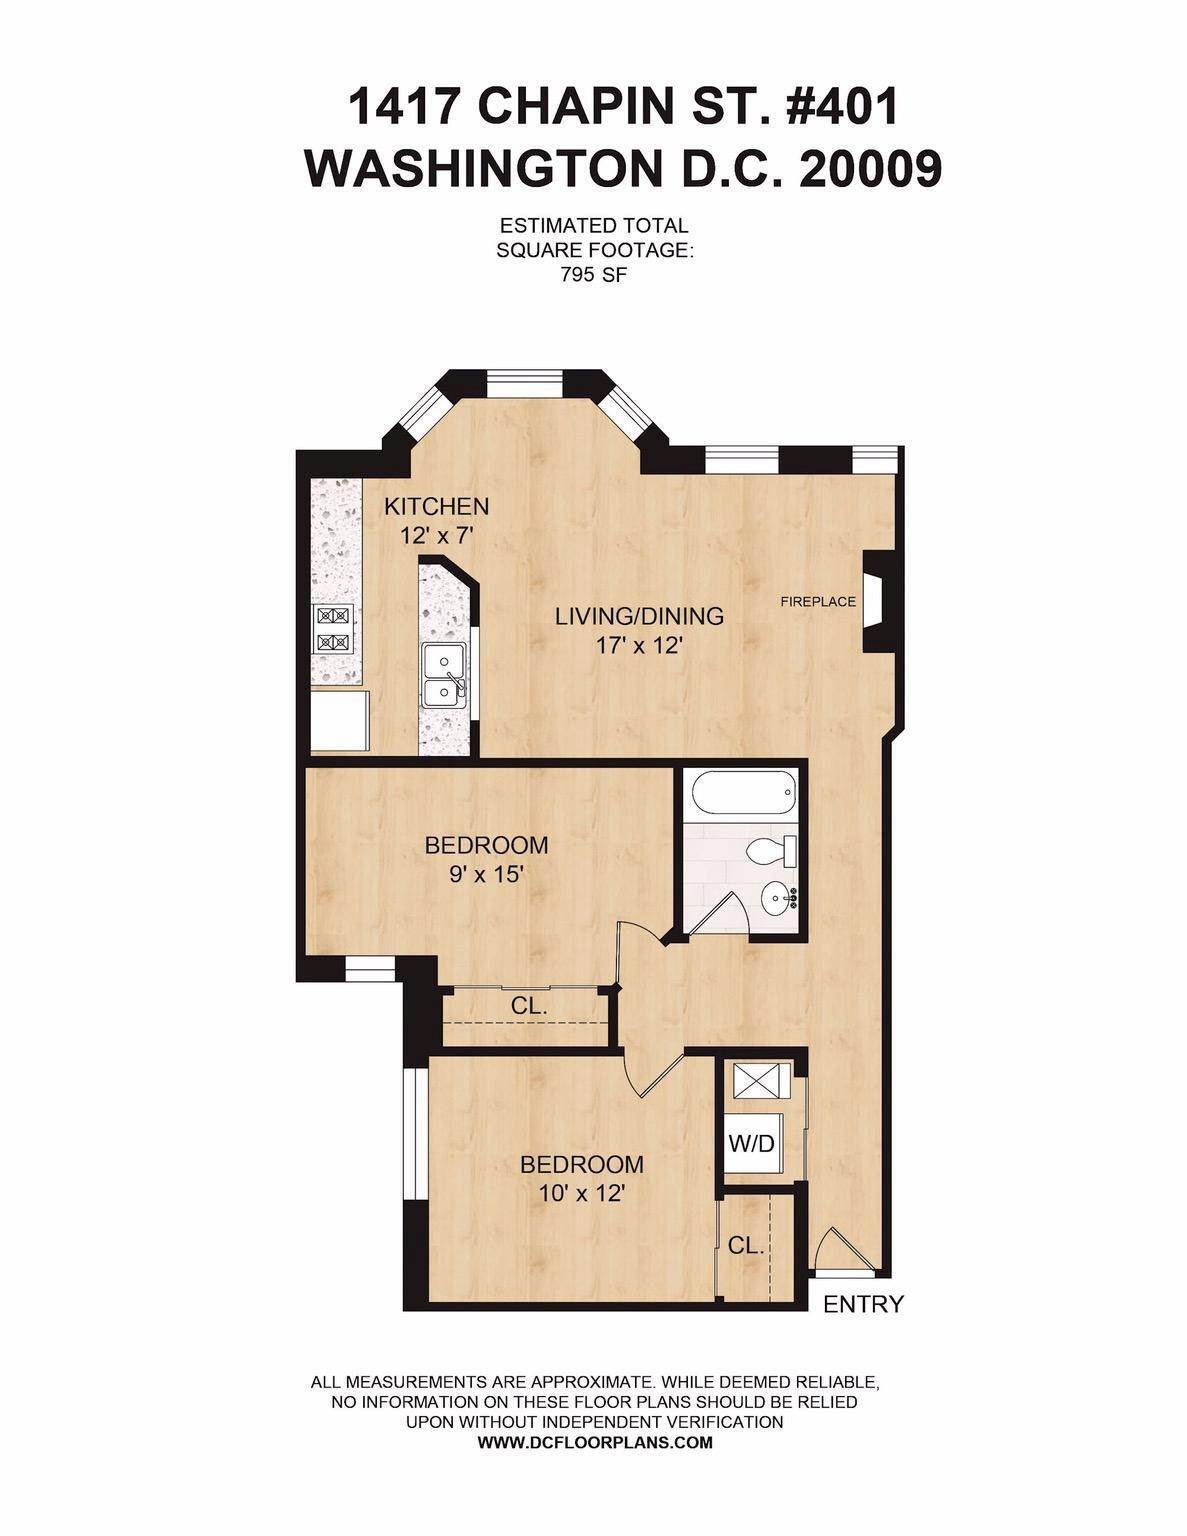 21. Condominiums for Sale at 1417 Chapin St Nw #401 Washington, District Of Columbia 20009 United States